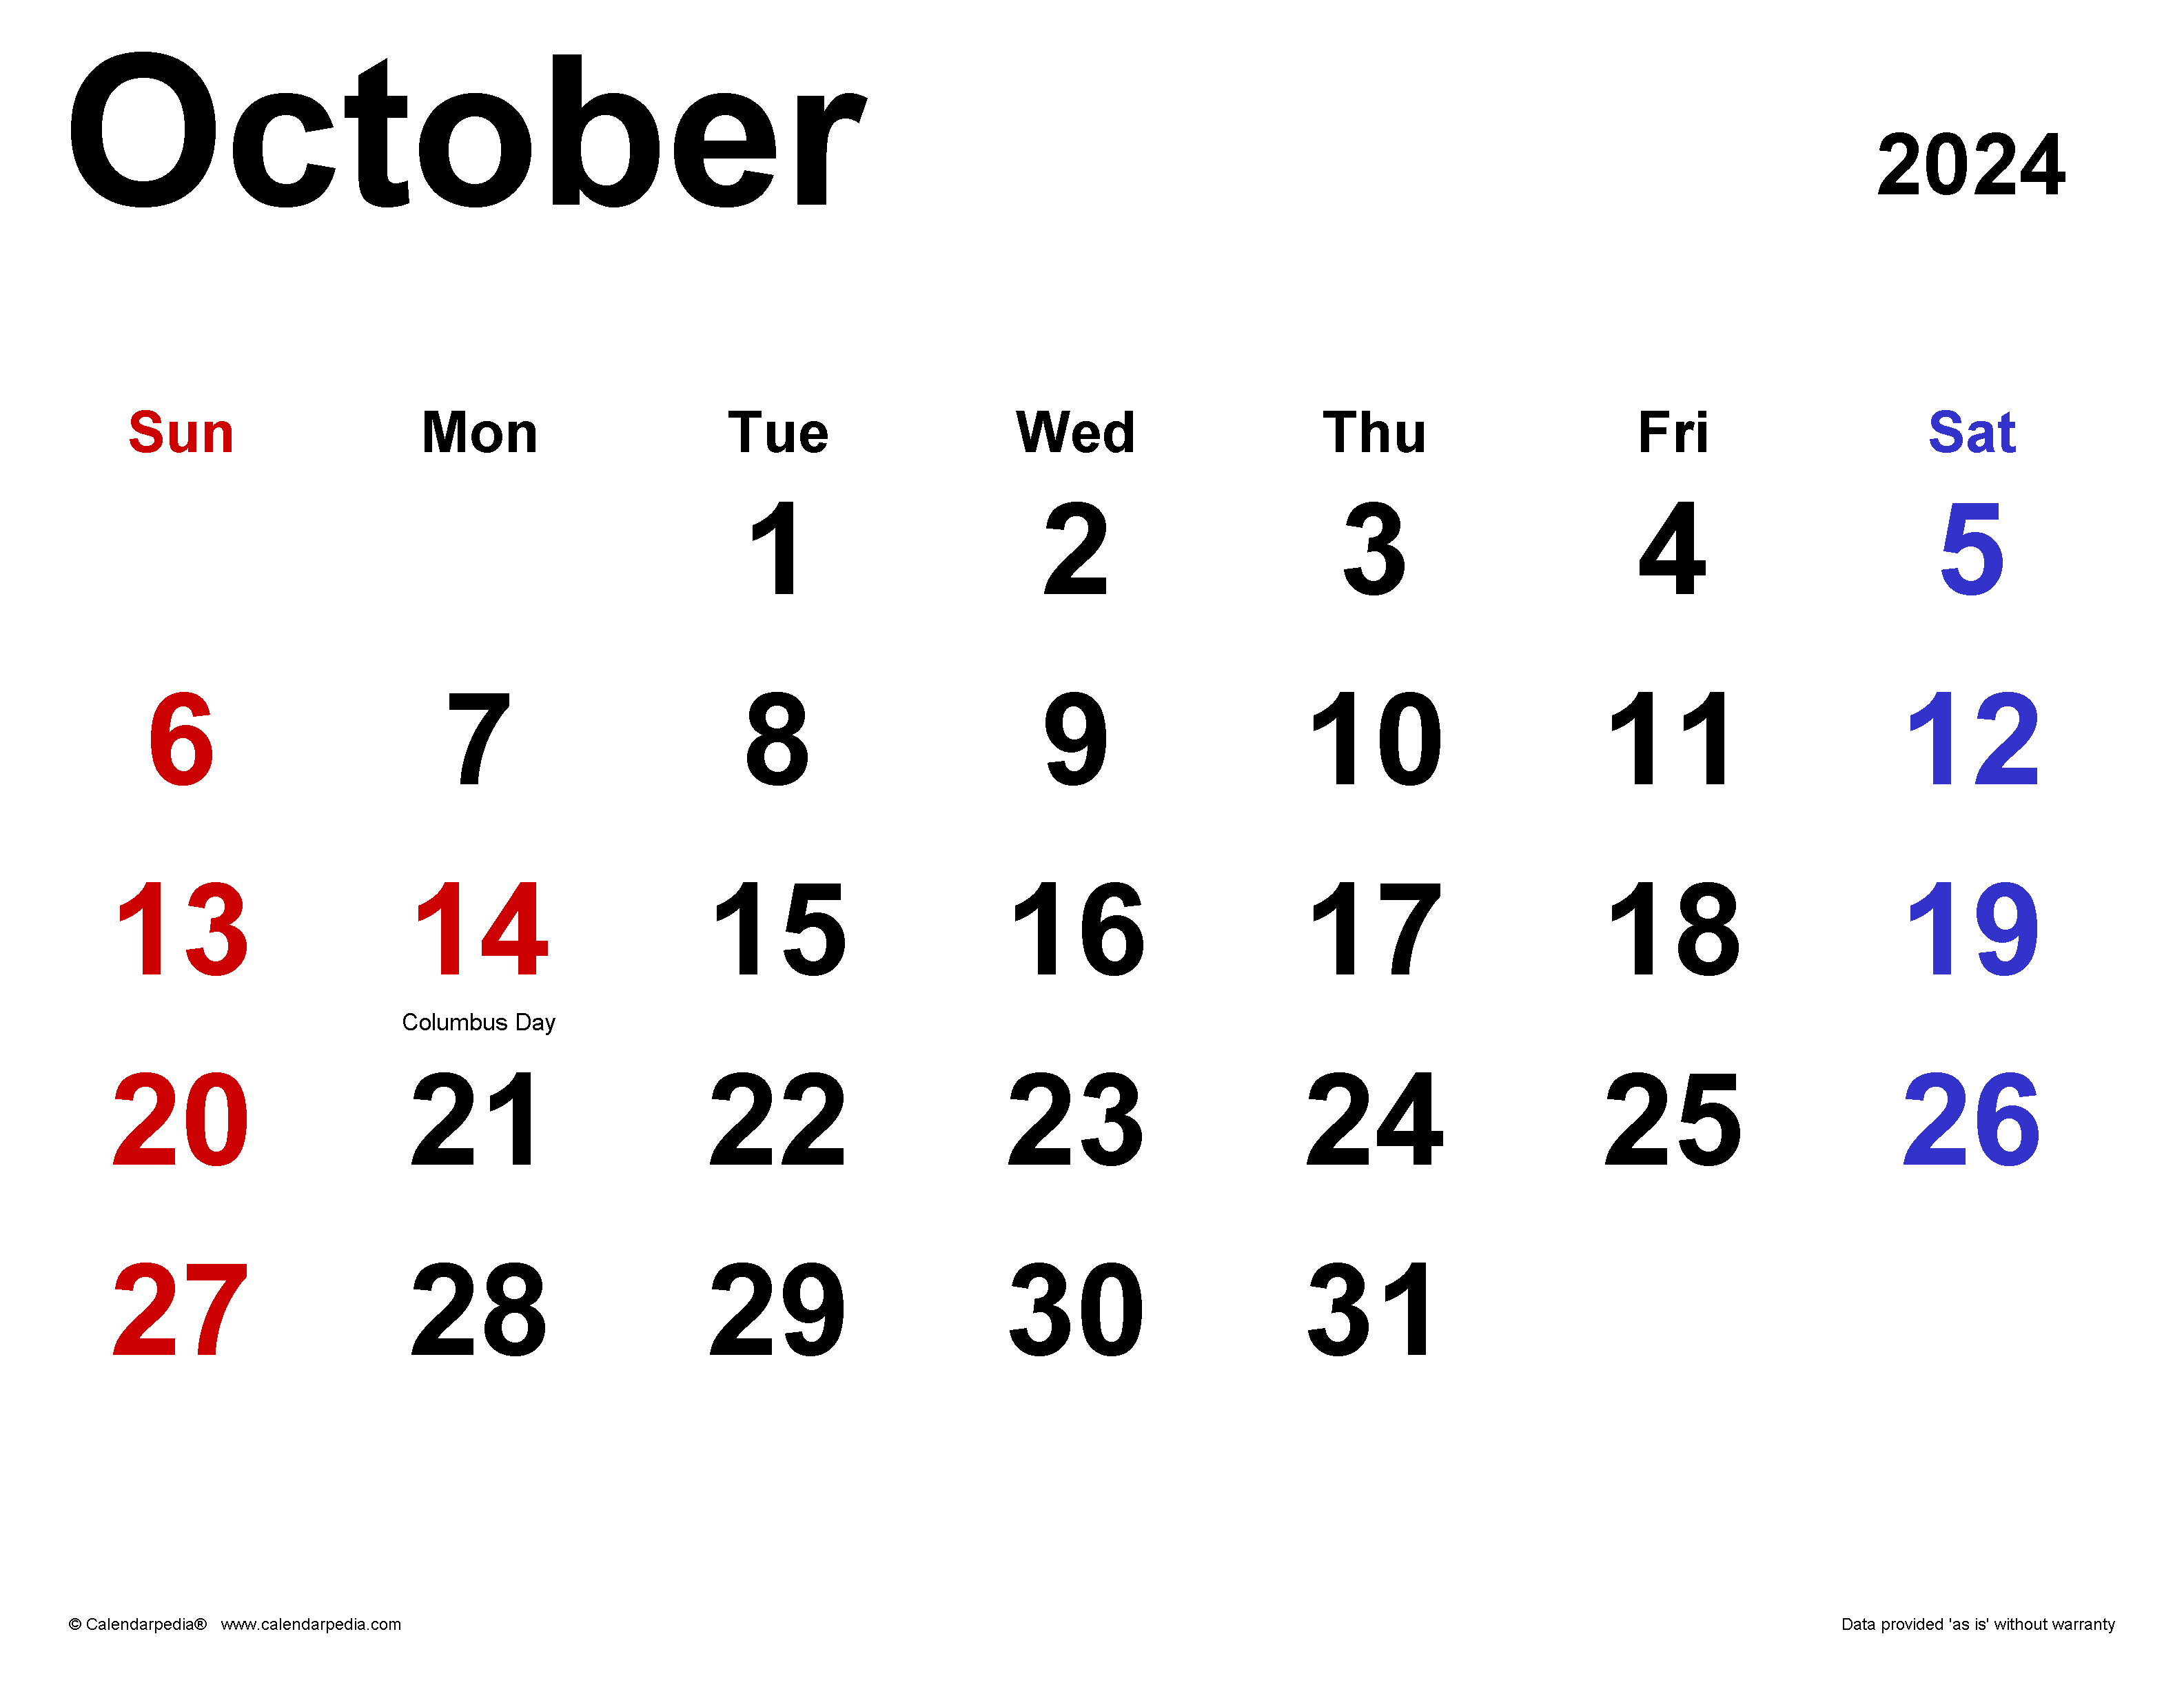 October 2024 Calendar | Templates For Word, Excel And Pdf with regard to Free Printable Appointment Calendar October 2024